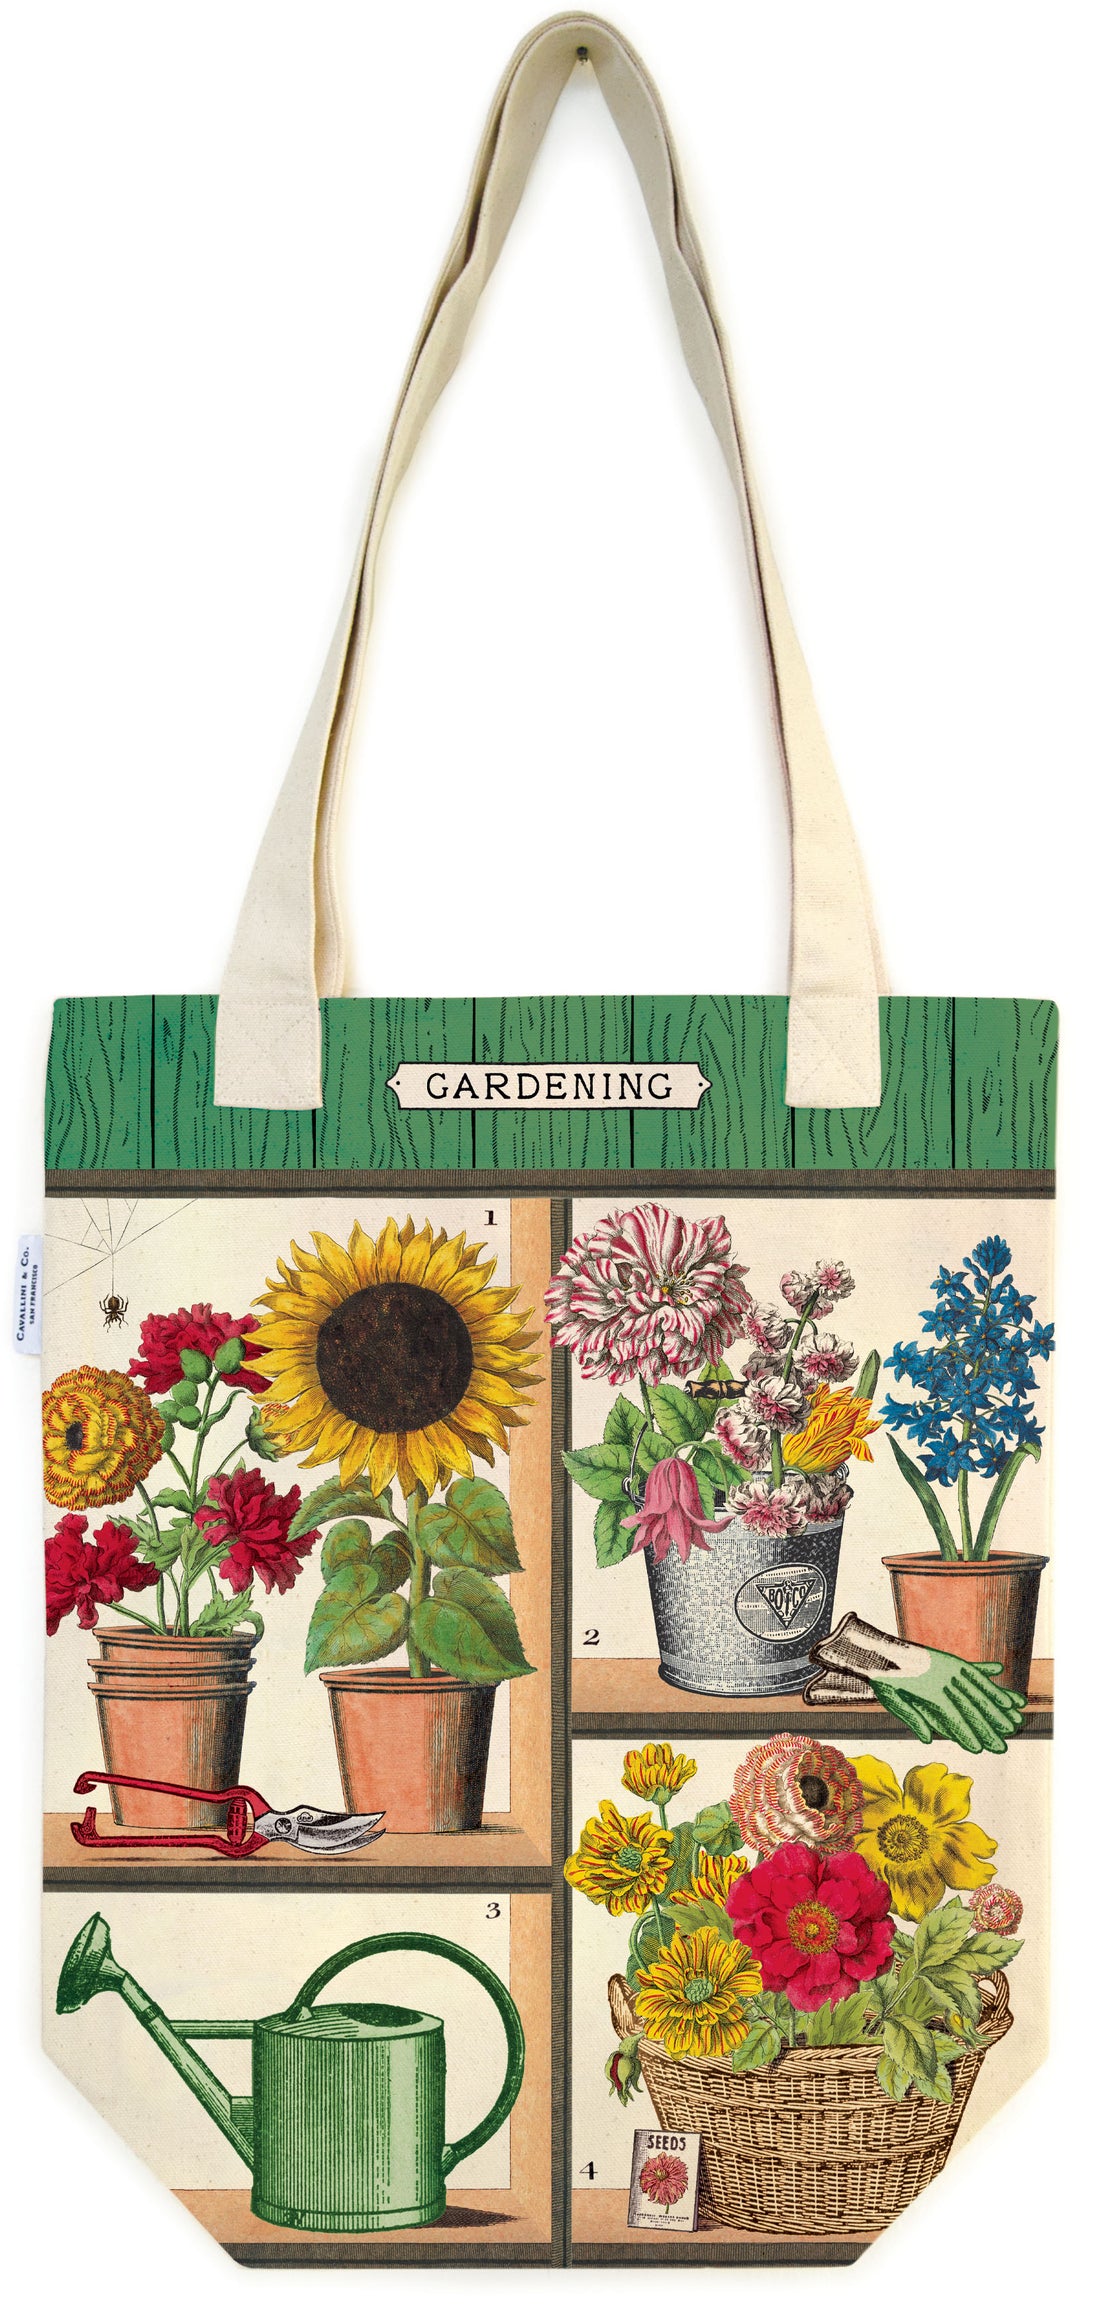 A Gardening Tote Bag from Cavallini Papers &amp; Co with pots of flowers and a watering can.